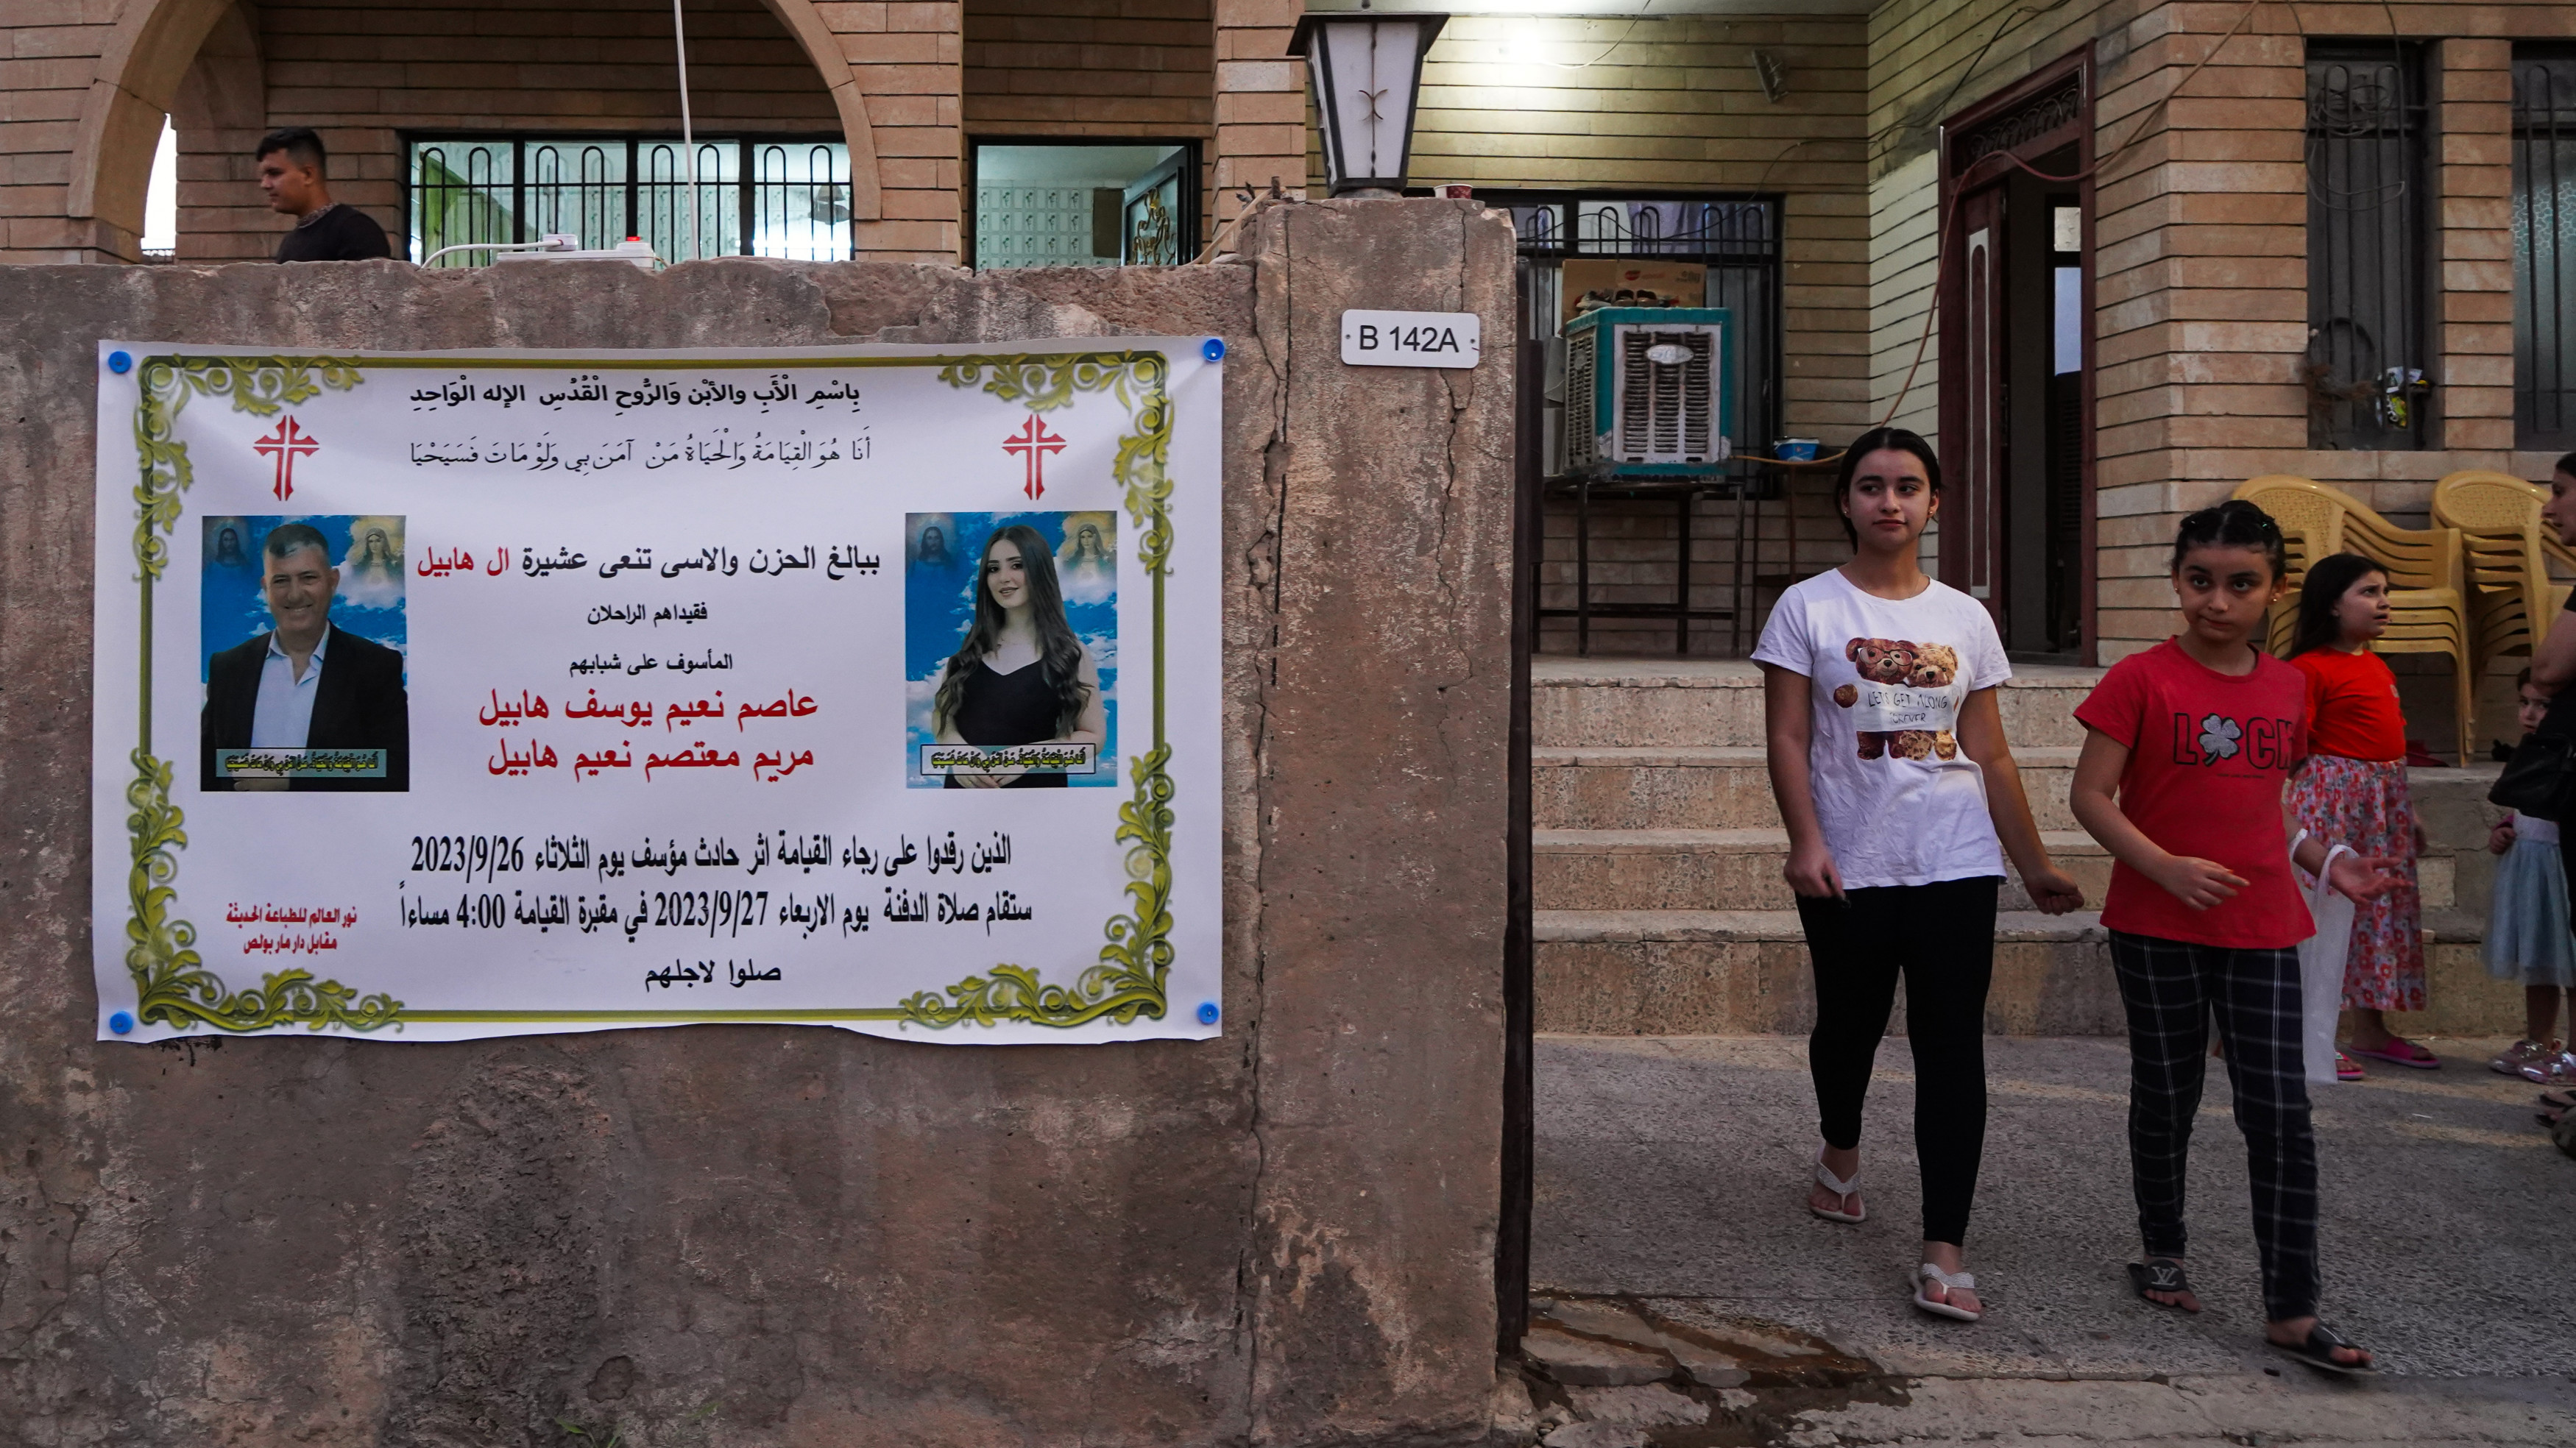 Poster of condolences for Maryam and her uncle Asem Naeem adorn a wall in Hamdaniya district (MEE/Ismael Adnan)